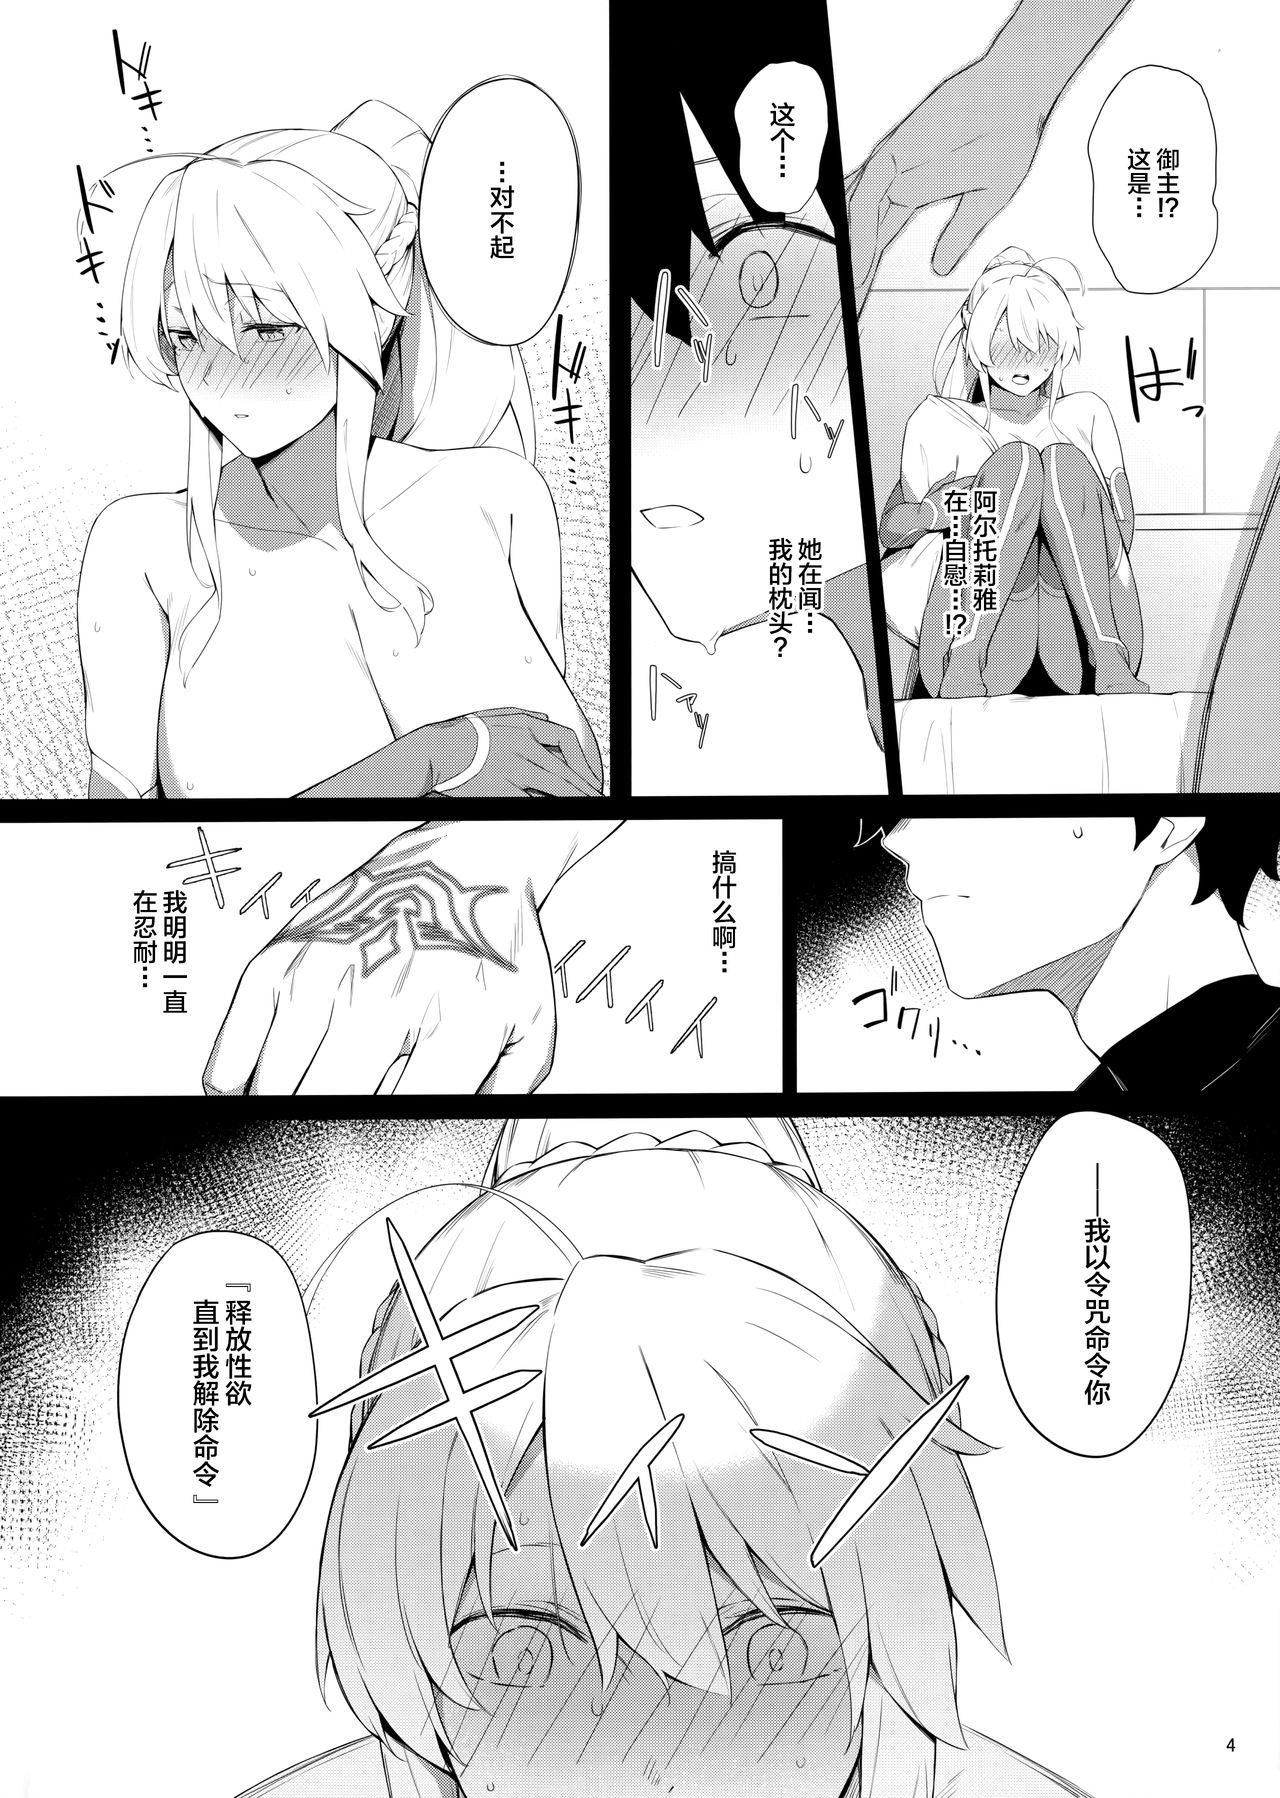 Horny Slut OUT OF CONTROL - Fate grand order Str8 - Page 3